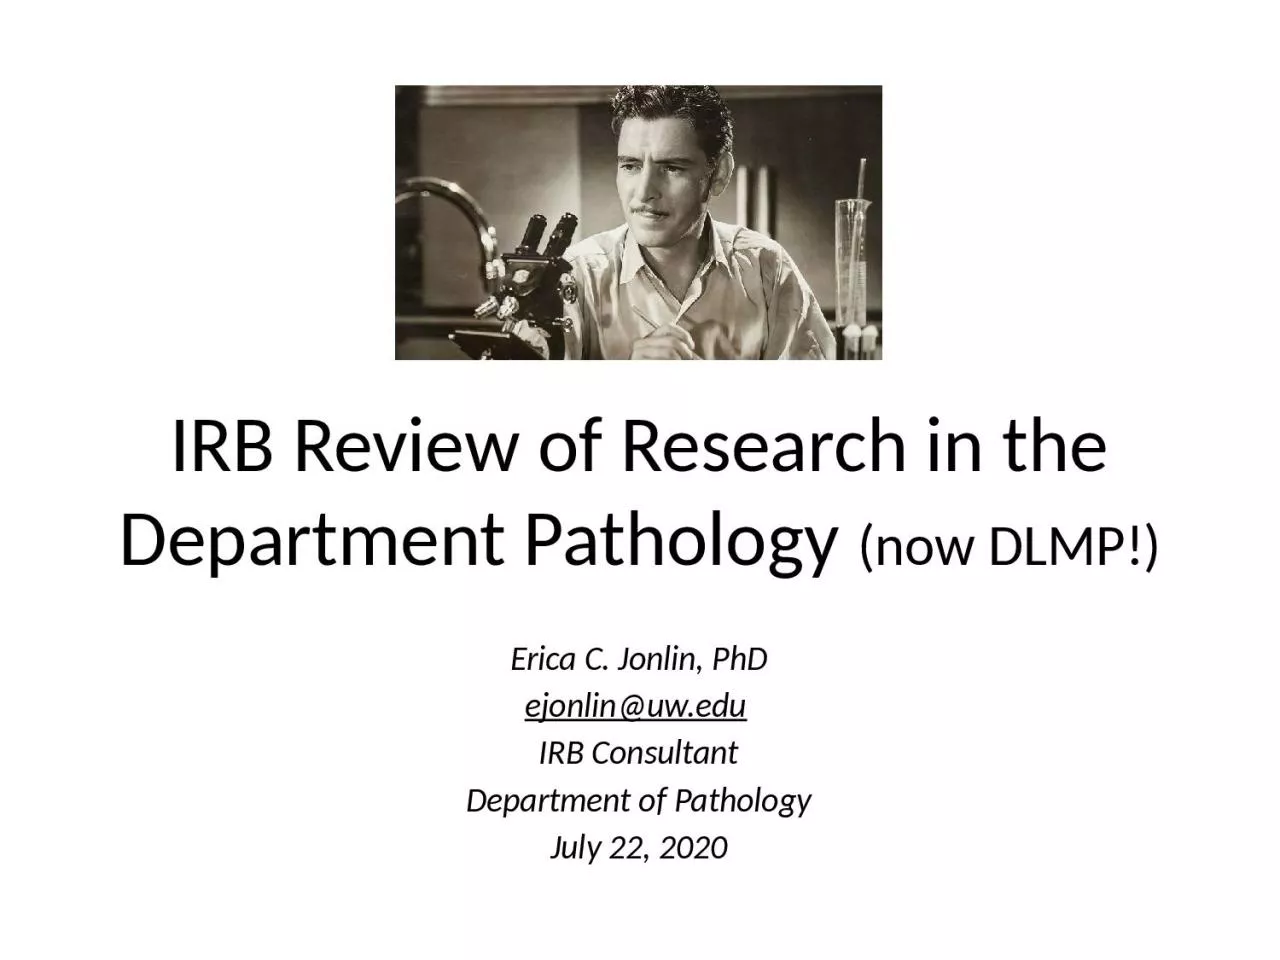 IRB Review of Research in the Department Pathology